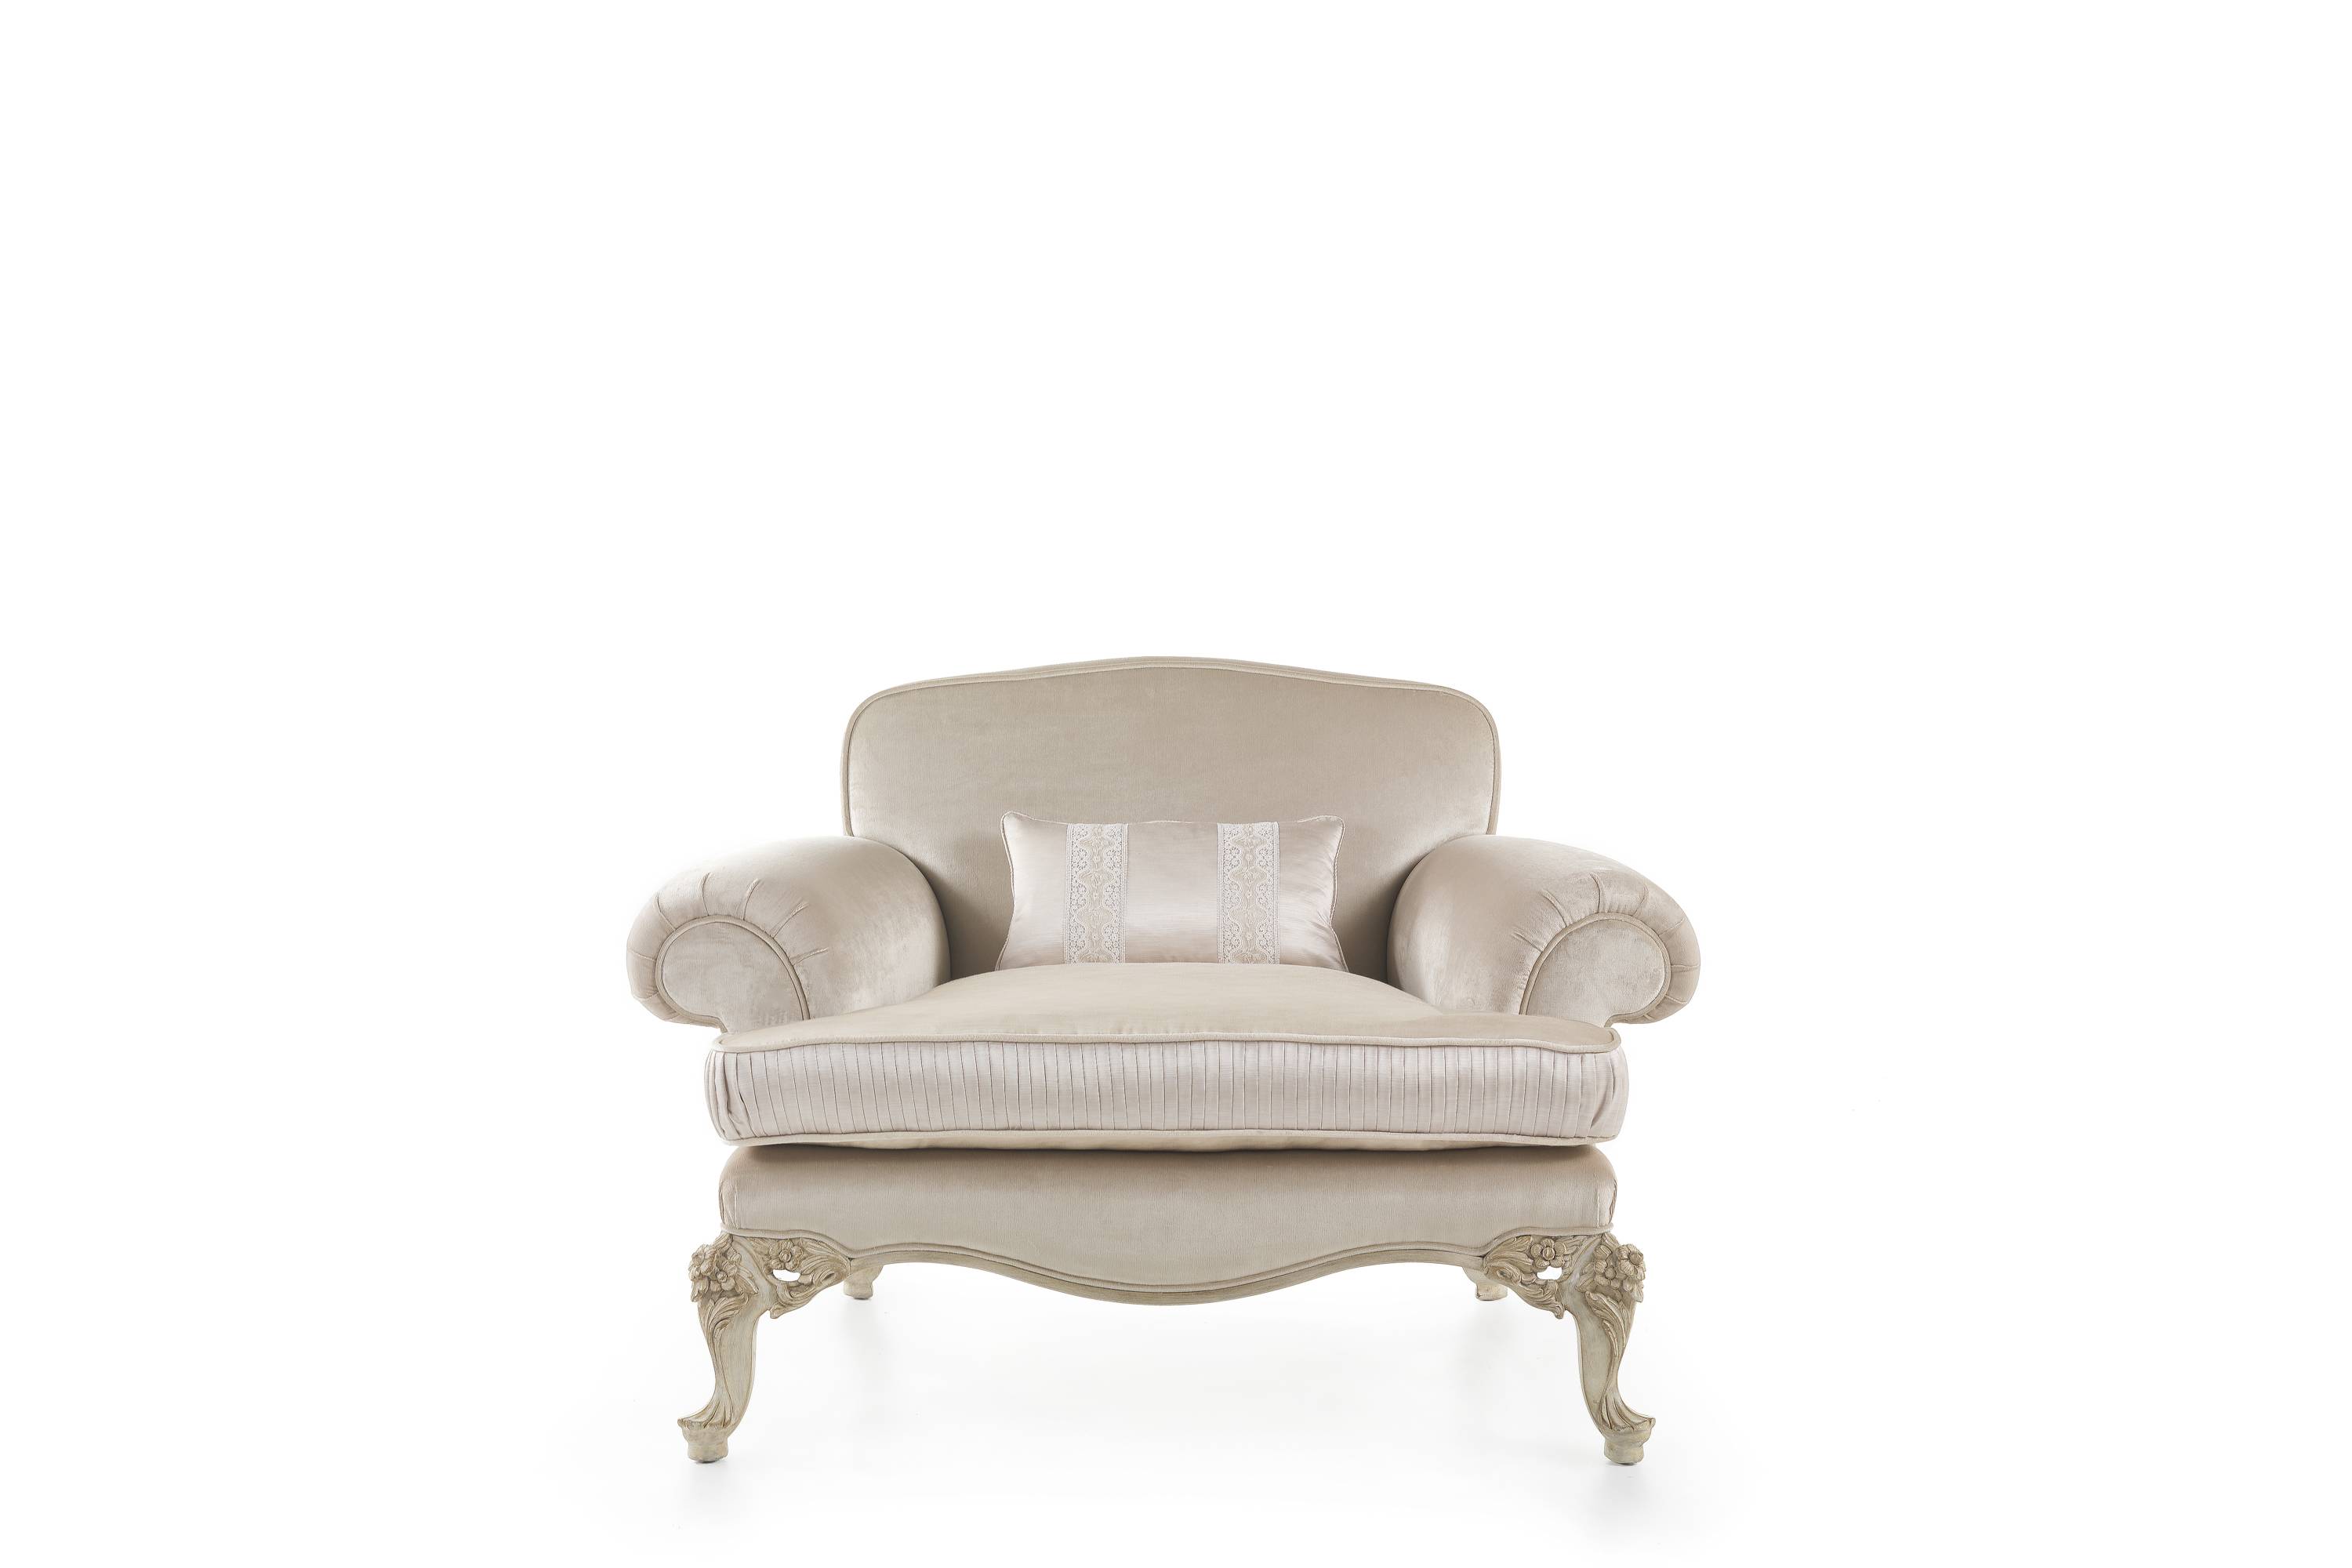 LA GRANDE DAME armchair – Transform your space with sophisticated Made in Italy classic armchairs.